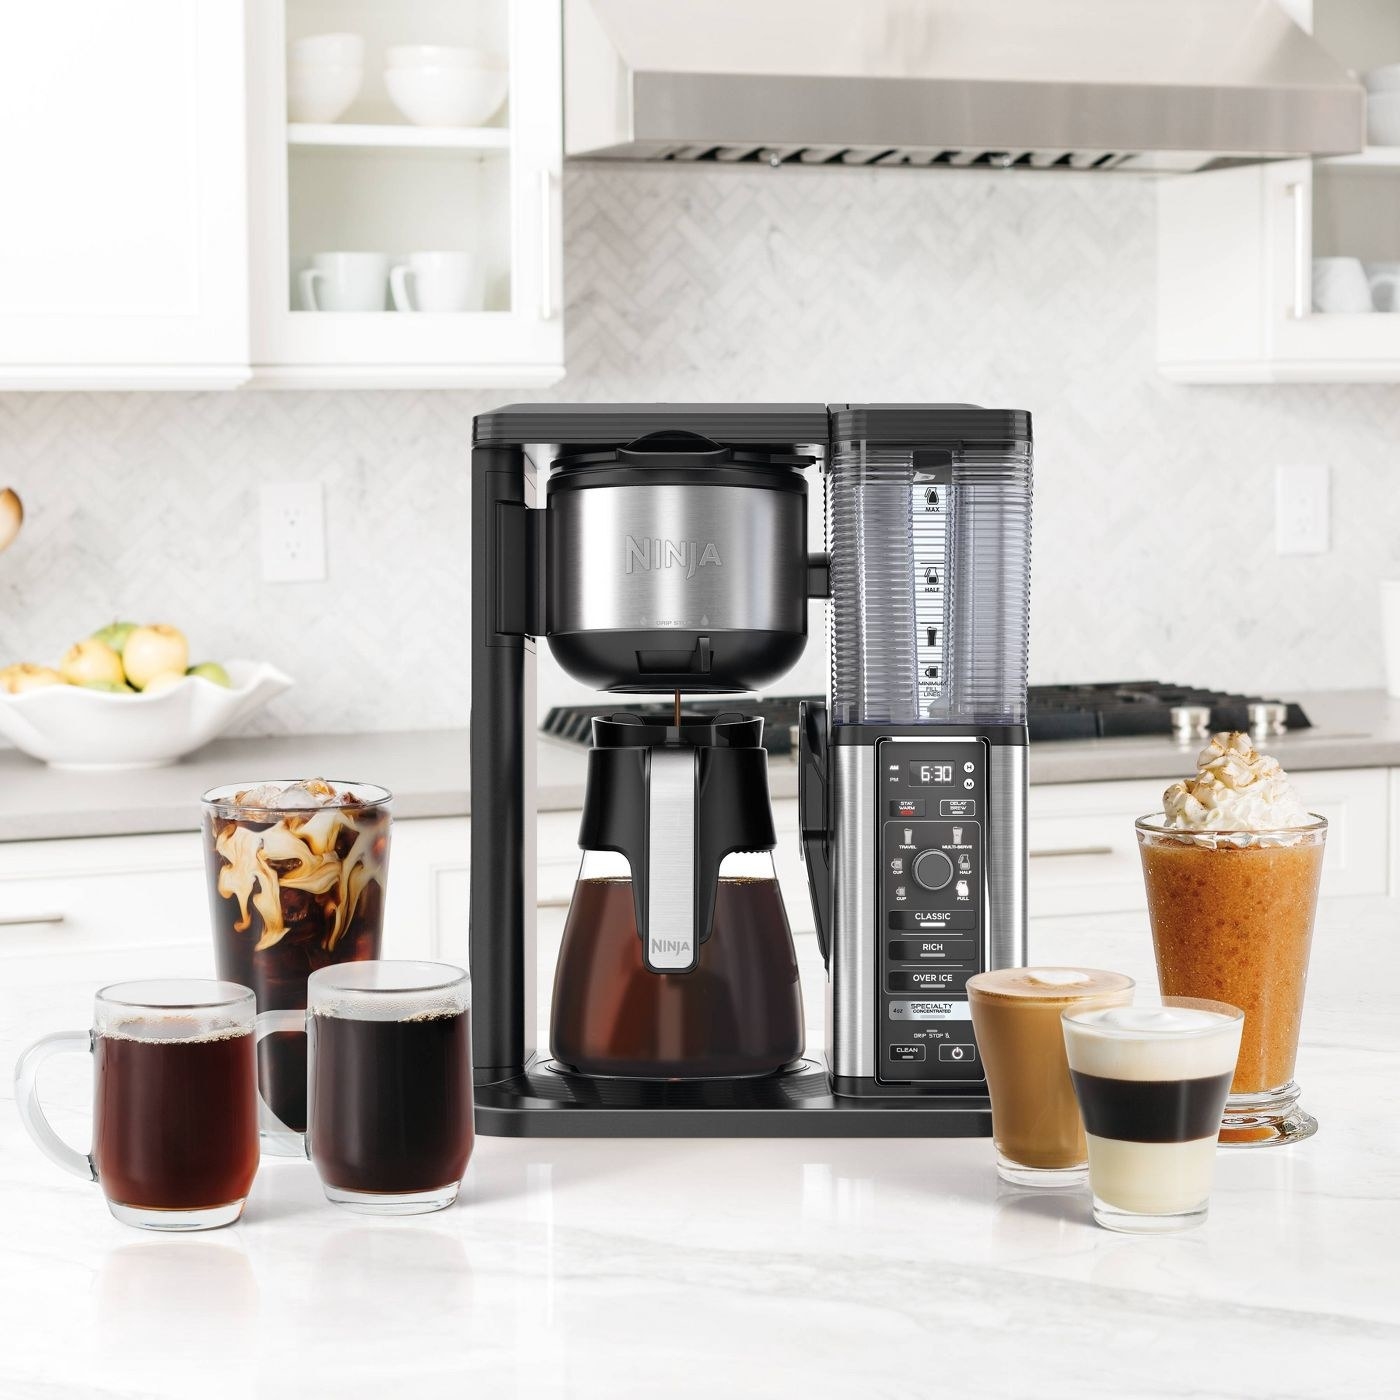 A specialty coffee maker on a kitchen counter surrounded by coffee drinks